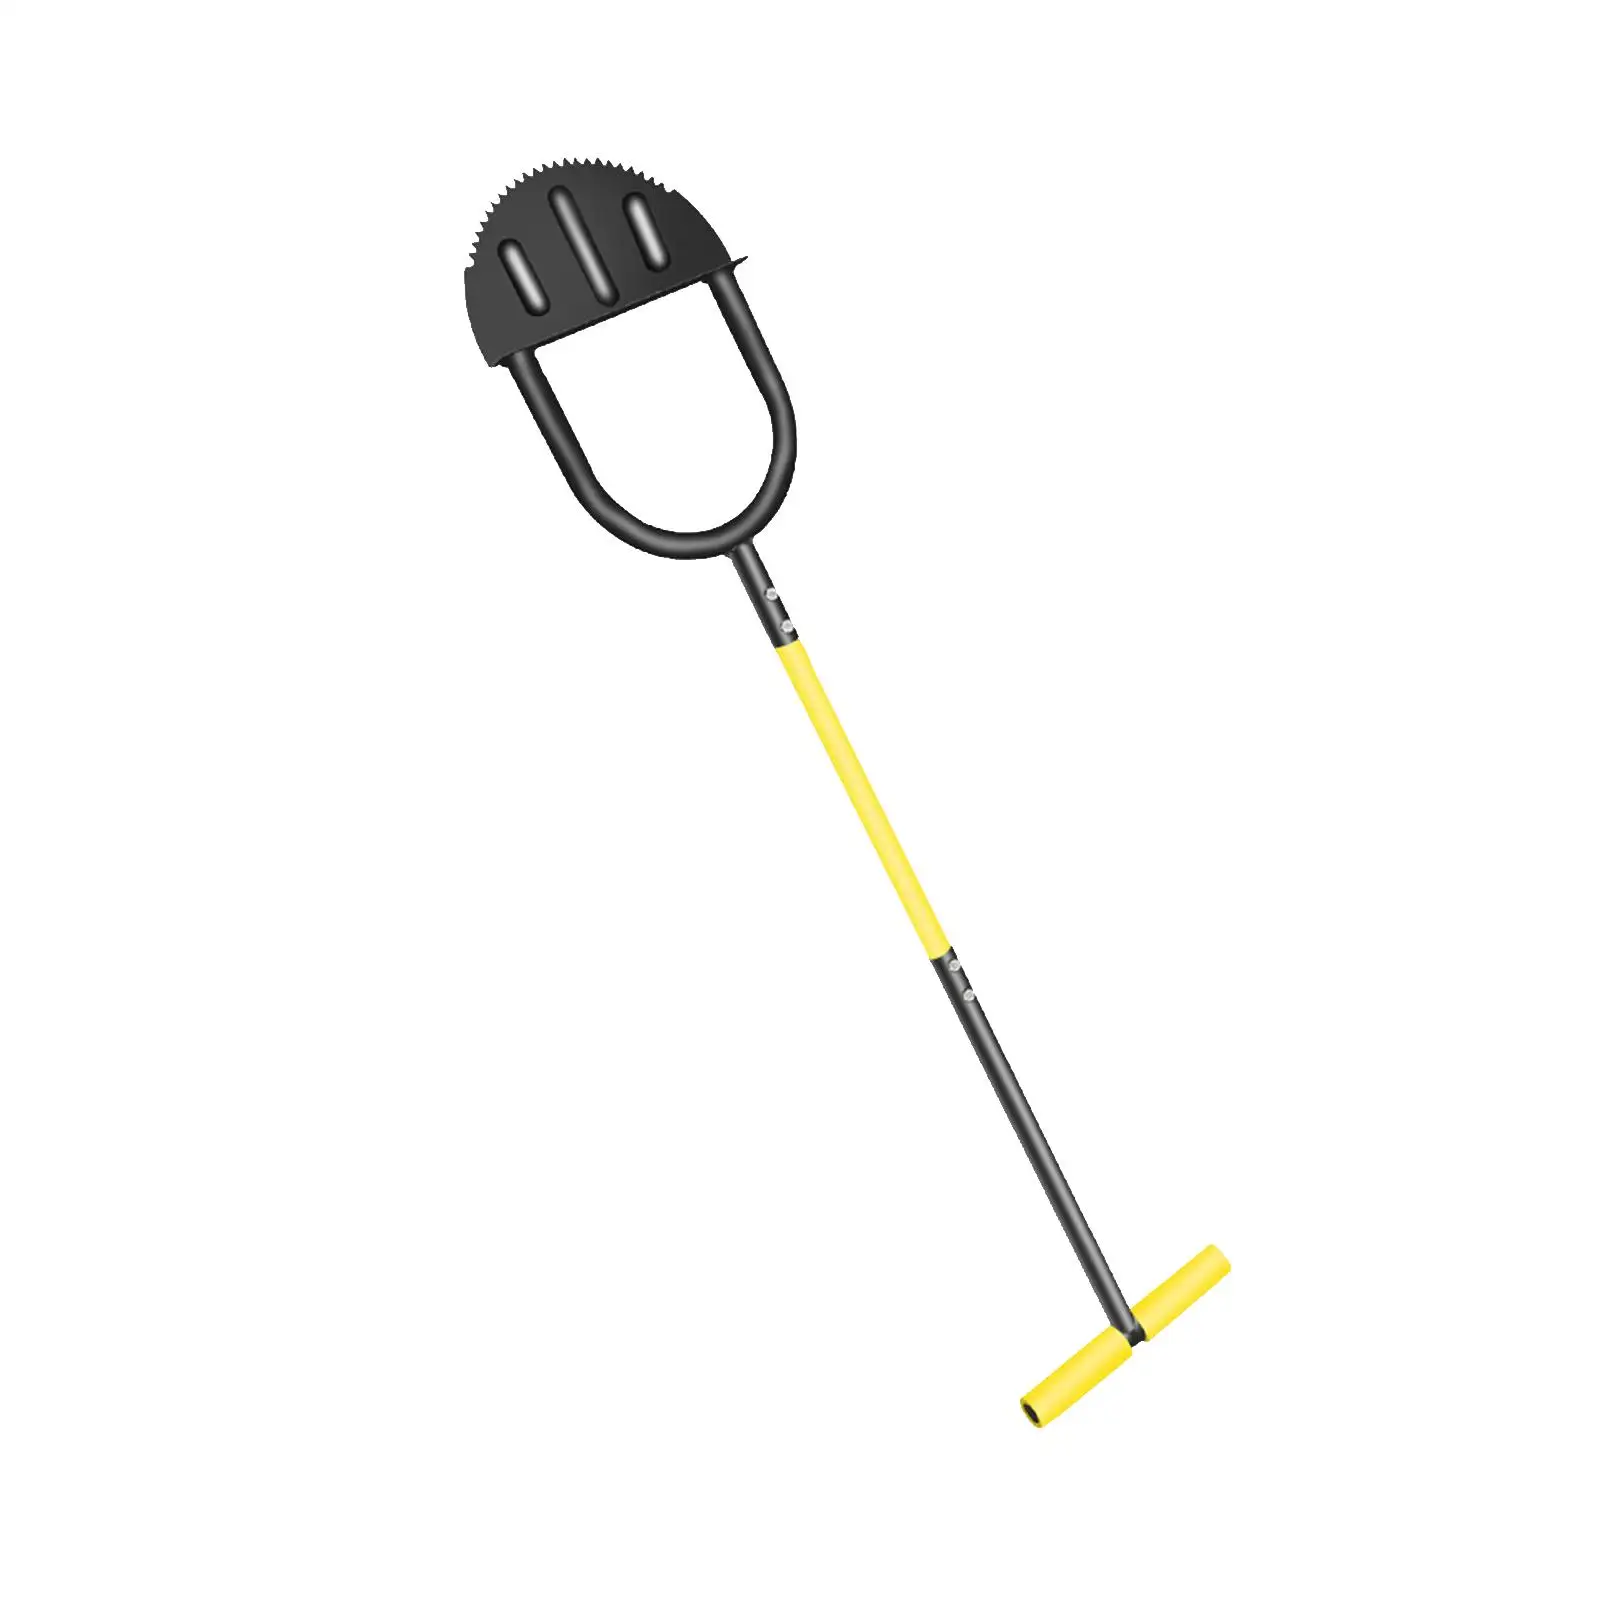 Manual Edger Edging Tool Trimming Shovel Steel Half Moon Edger Saw Tooth Edger for Driveway Garden Flower Beds